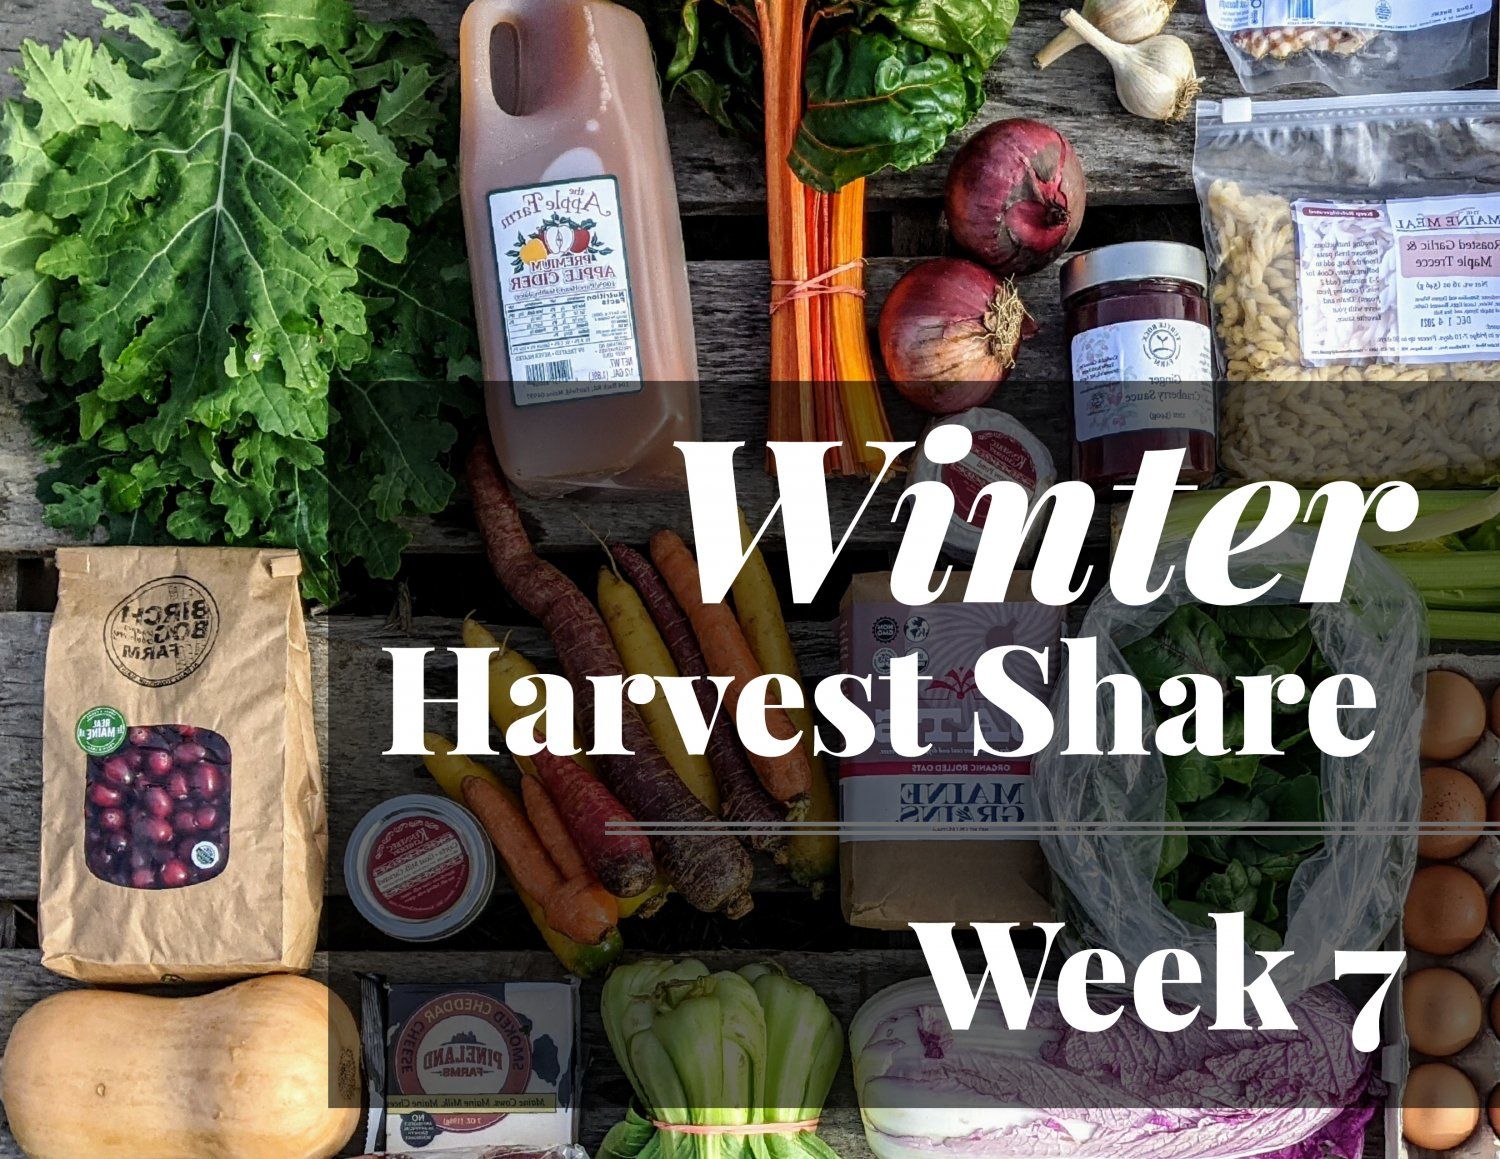 Previous Happening: Winter Harvest Share - Week 7